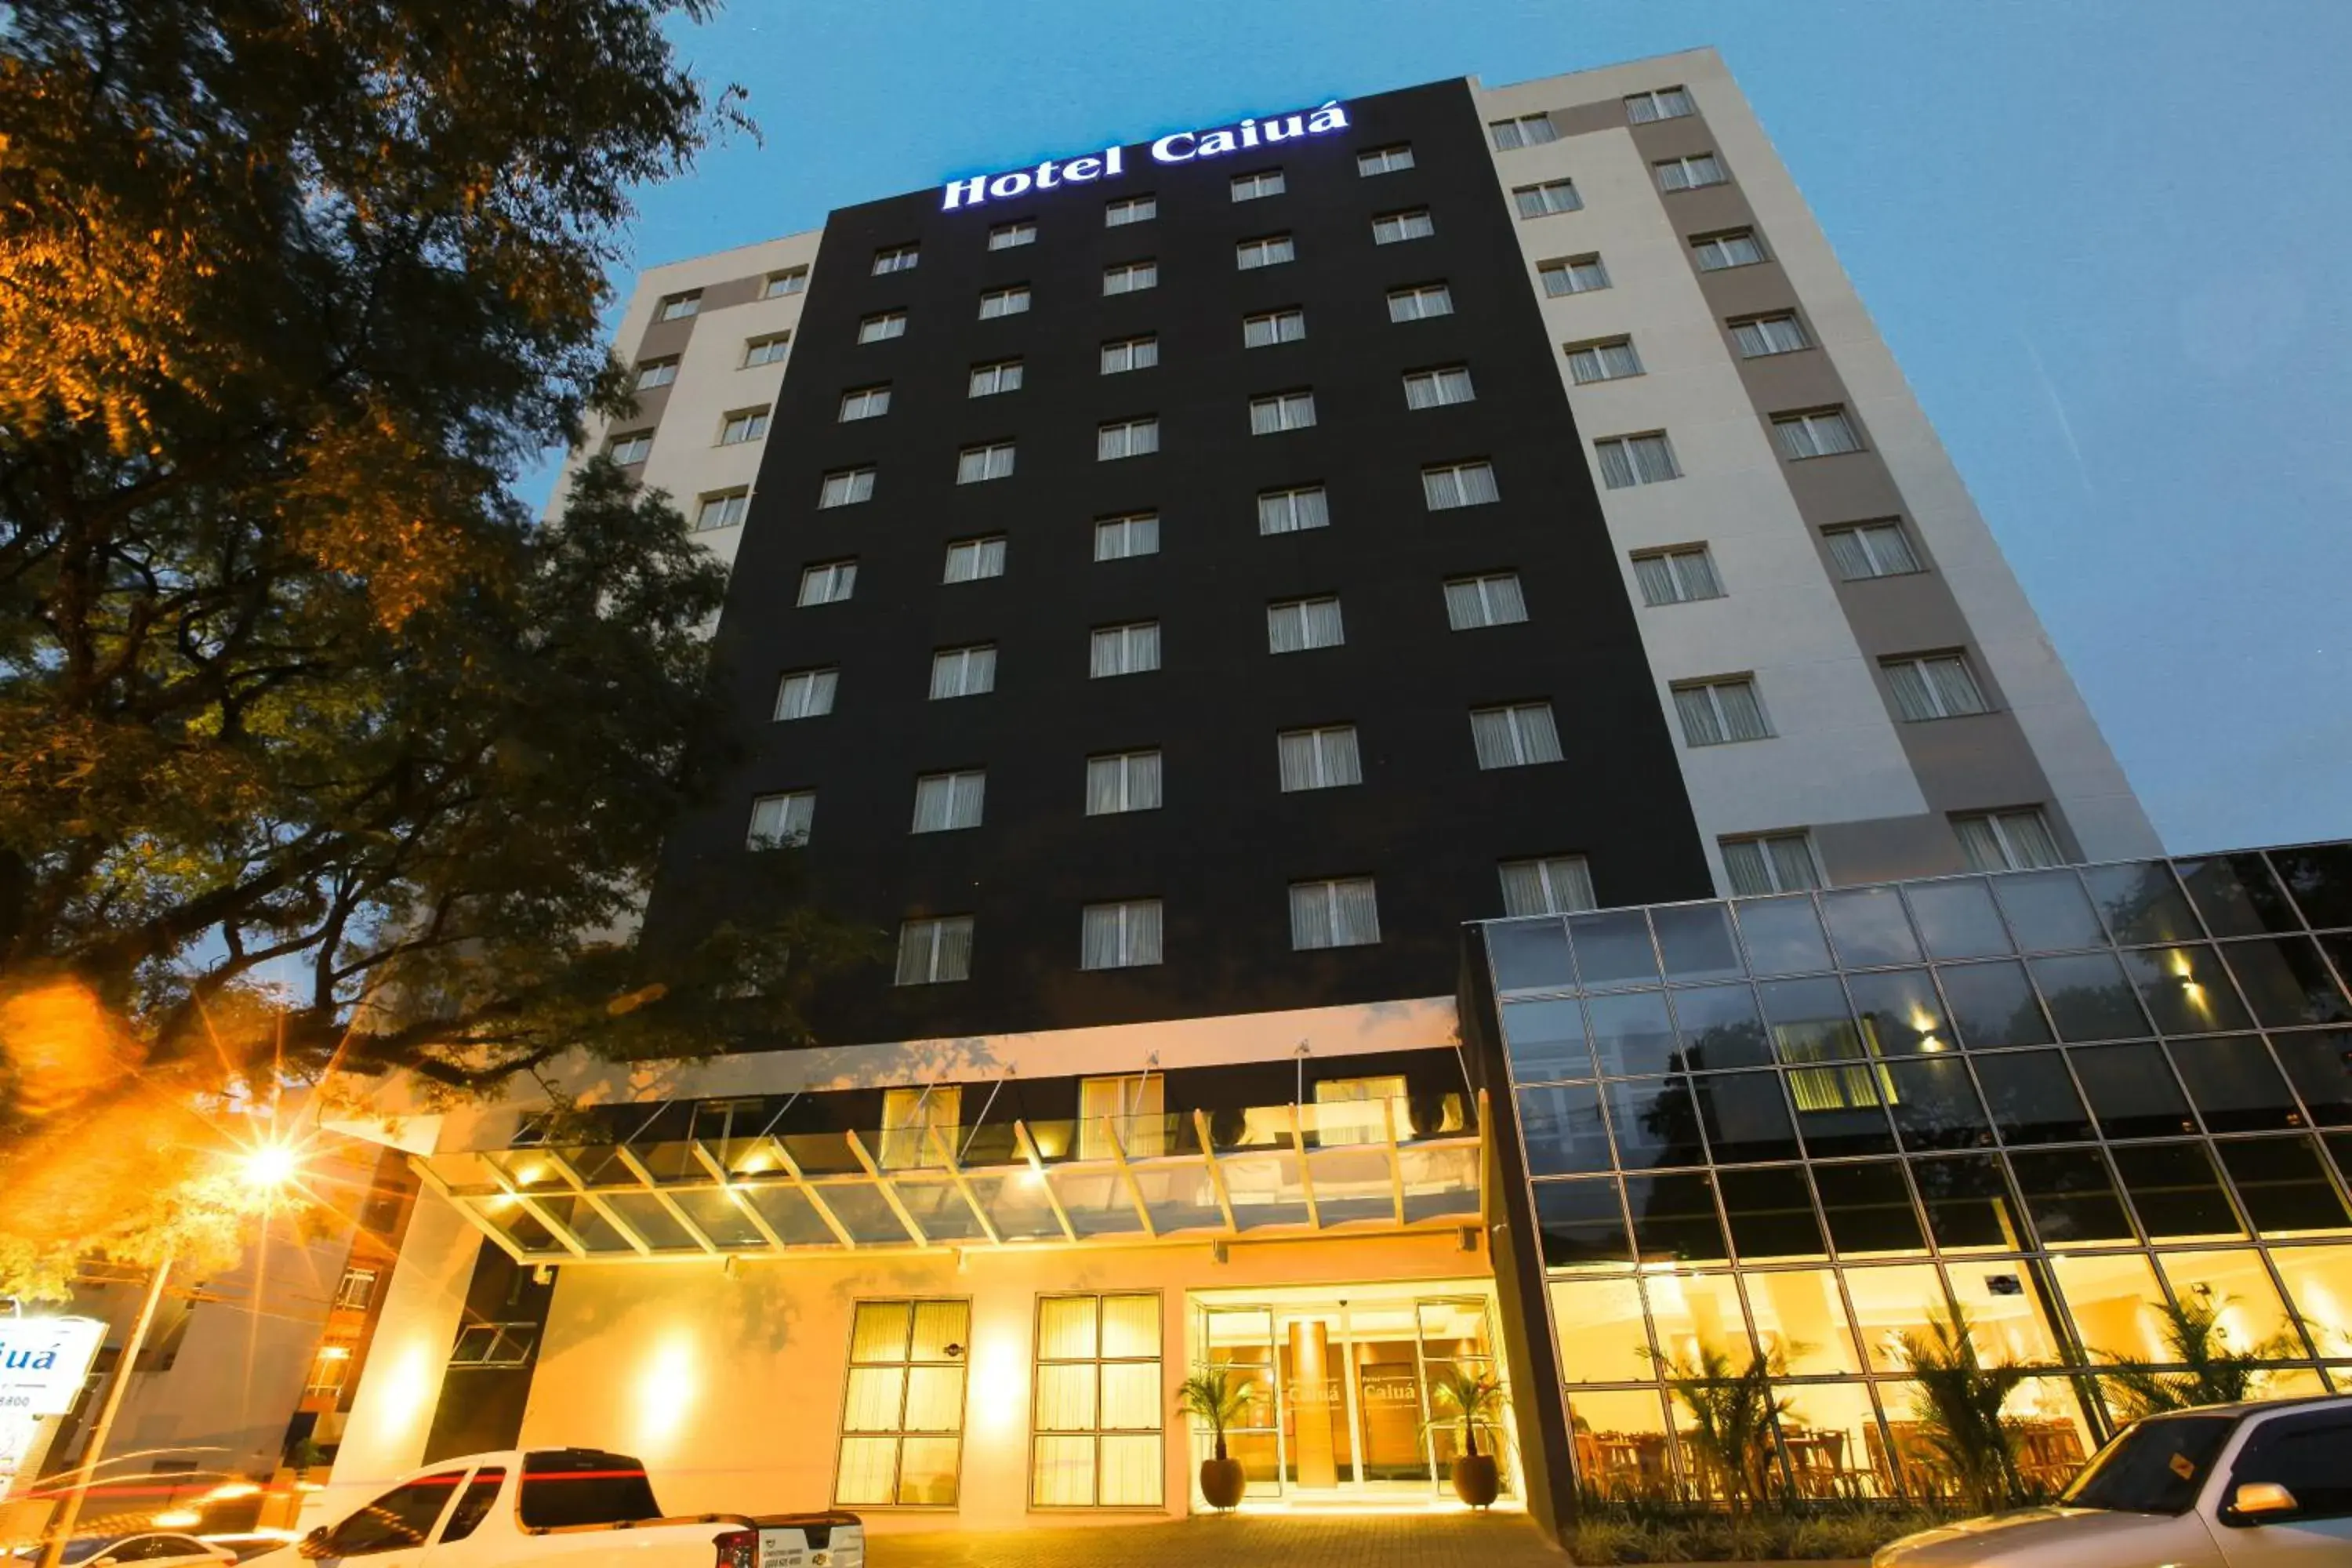 Property Building in Hotel Caiuá Cascavel